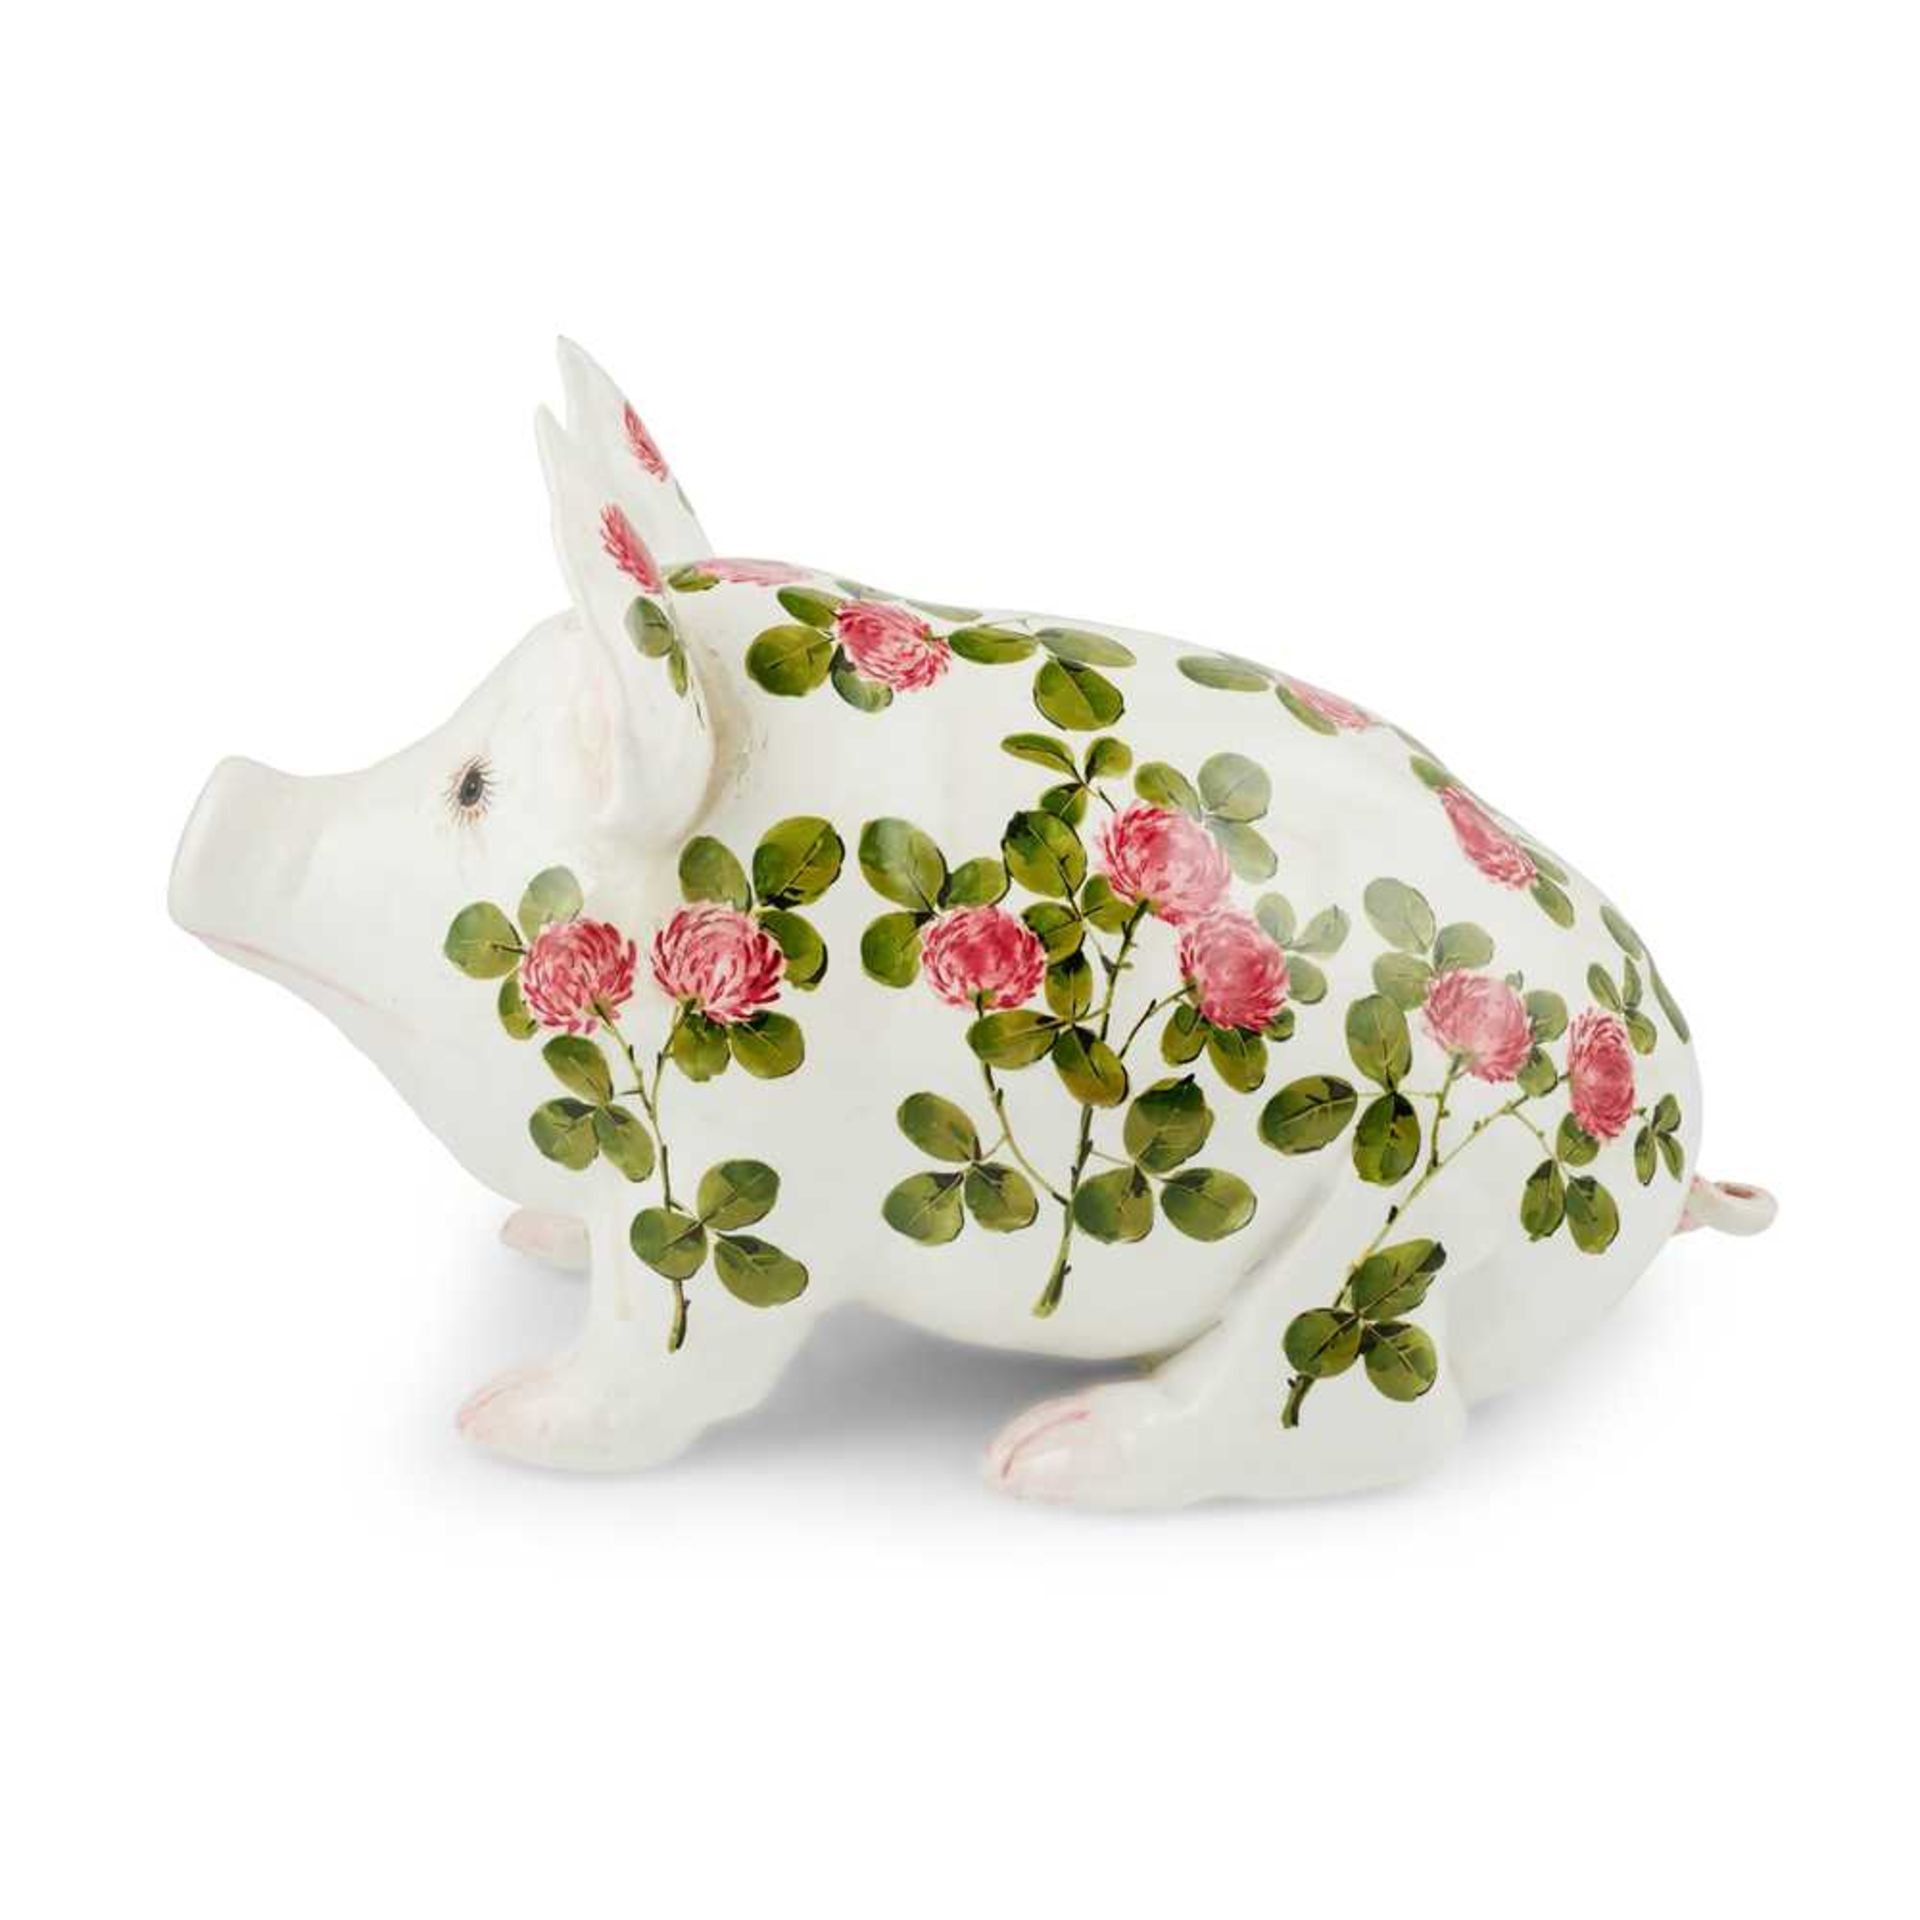 A LARGE WEMYSS WARE PIG 'CLOVER' PATTERN, POST 1930 - Image 2 of 4